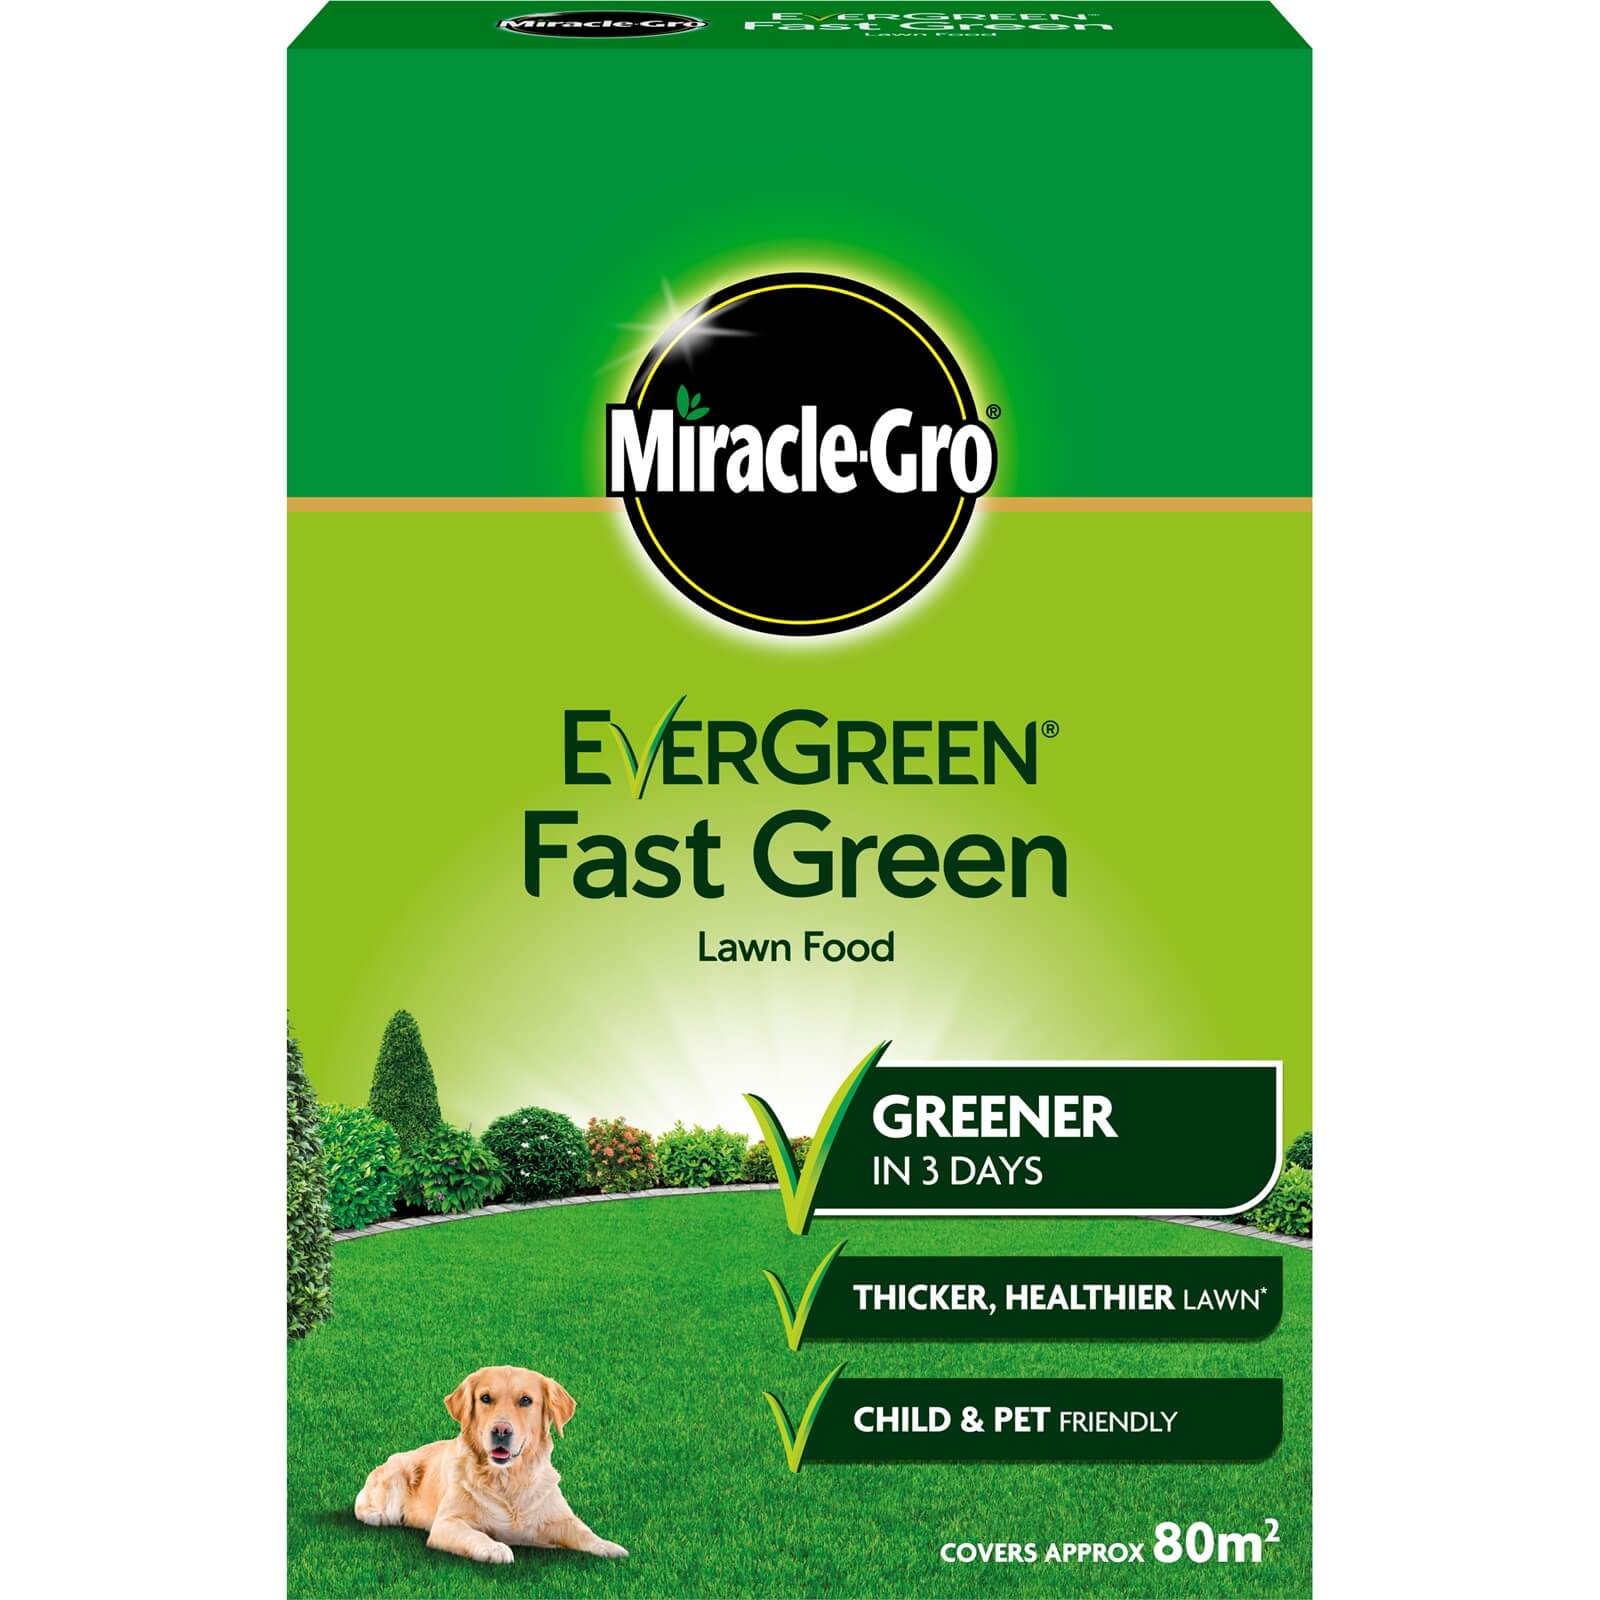 Photo of Miracle-gro Evergreen Fast Green Lawn Food - 80m²